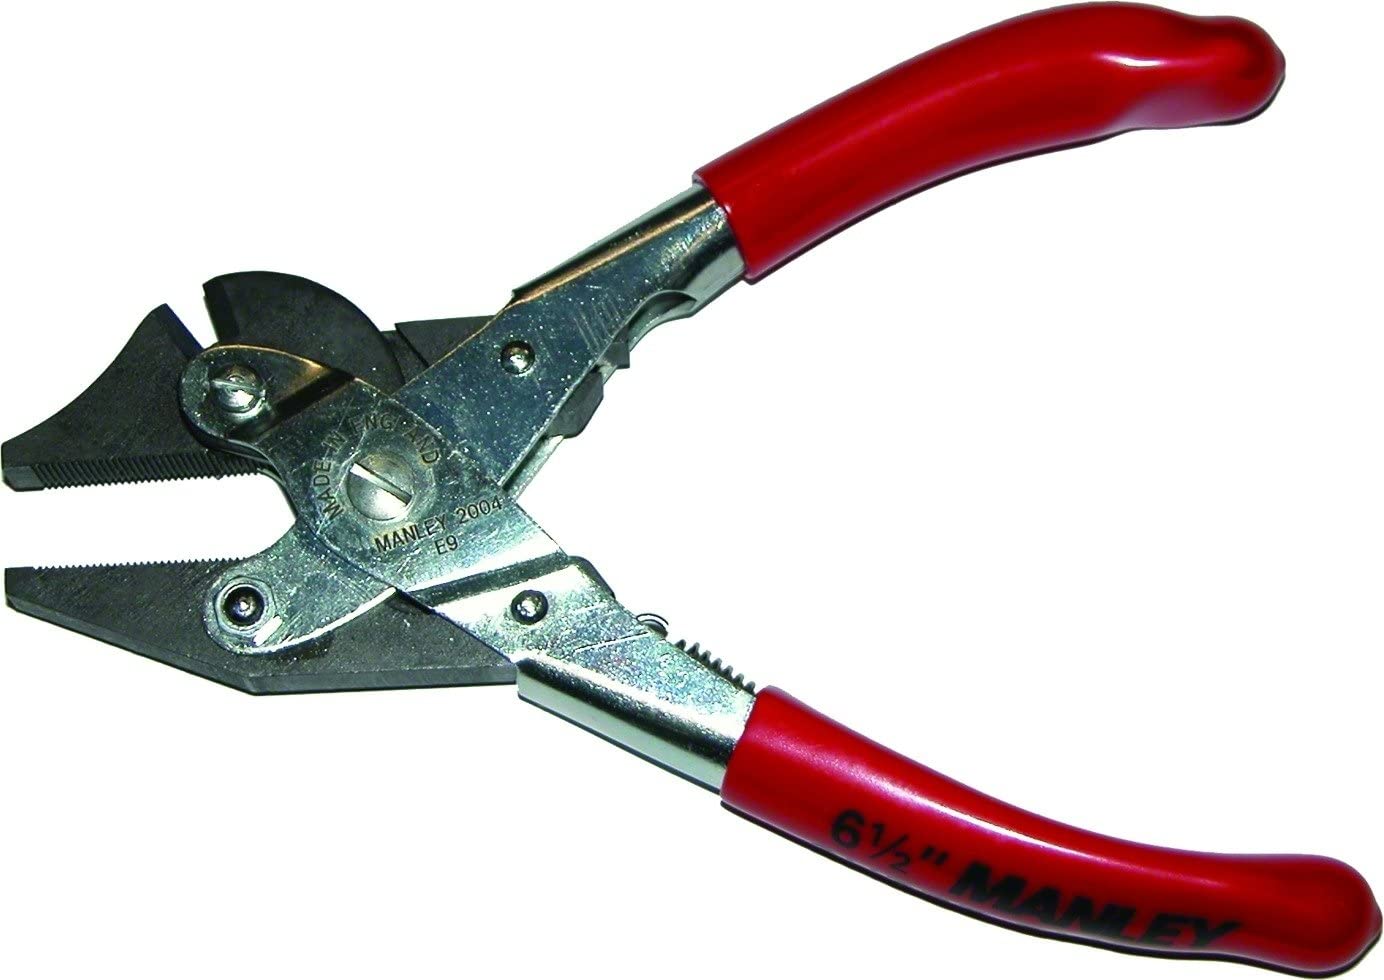 Fisherman's Guide to Pliers